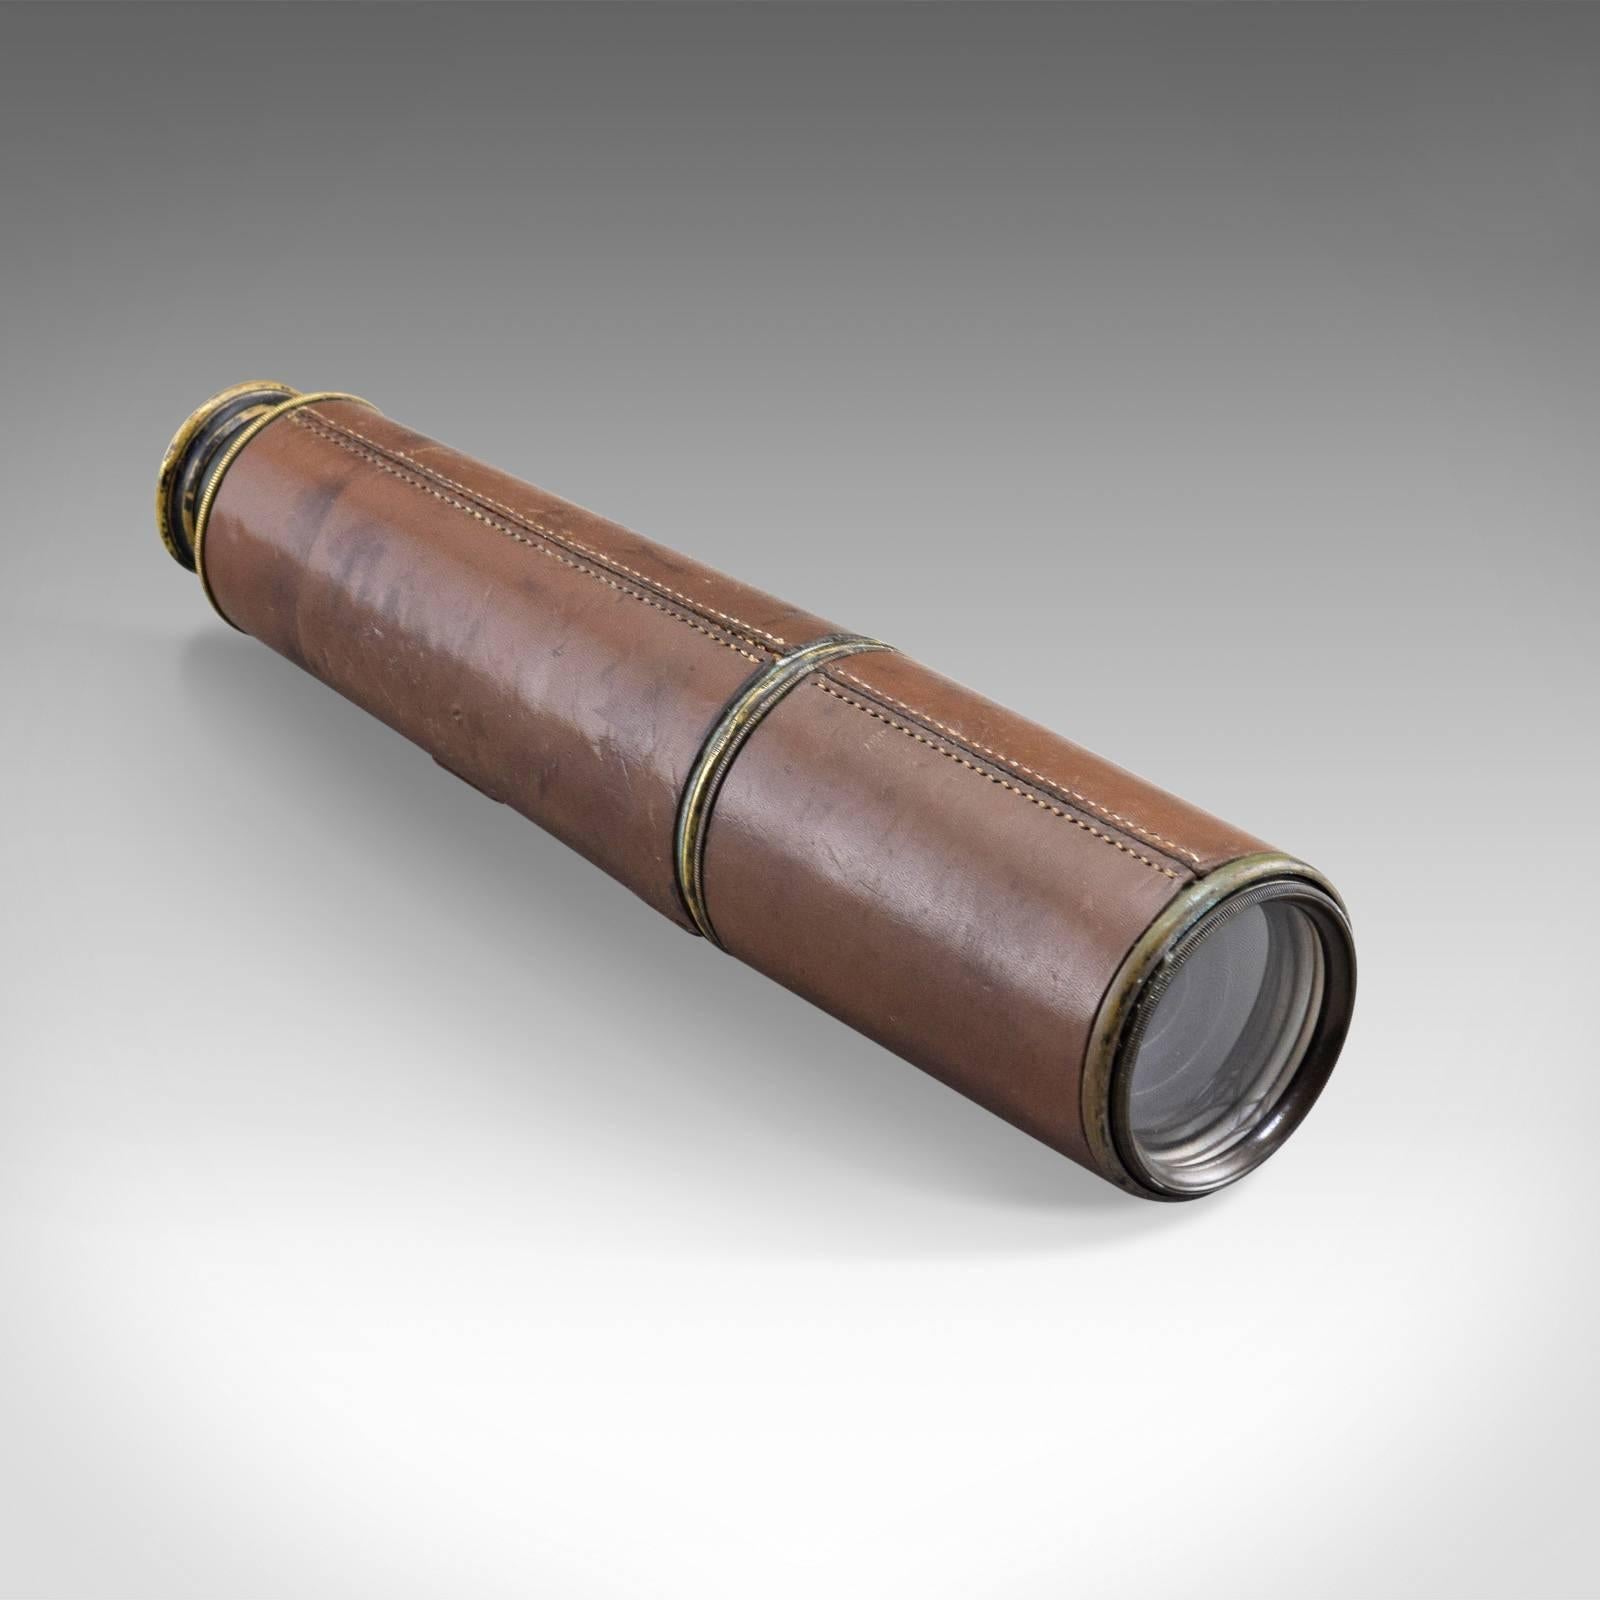 This is an antique telescope dating to the early 20th century.

In fine order physically and optically, this three draw Broadhurst Clarkson Scope carries the military arrow stamp and is engraved ' TEL. SIG. MK.VI, (BC & Co. Ltd Logo), 7857, O.S.